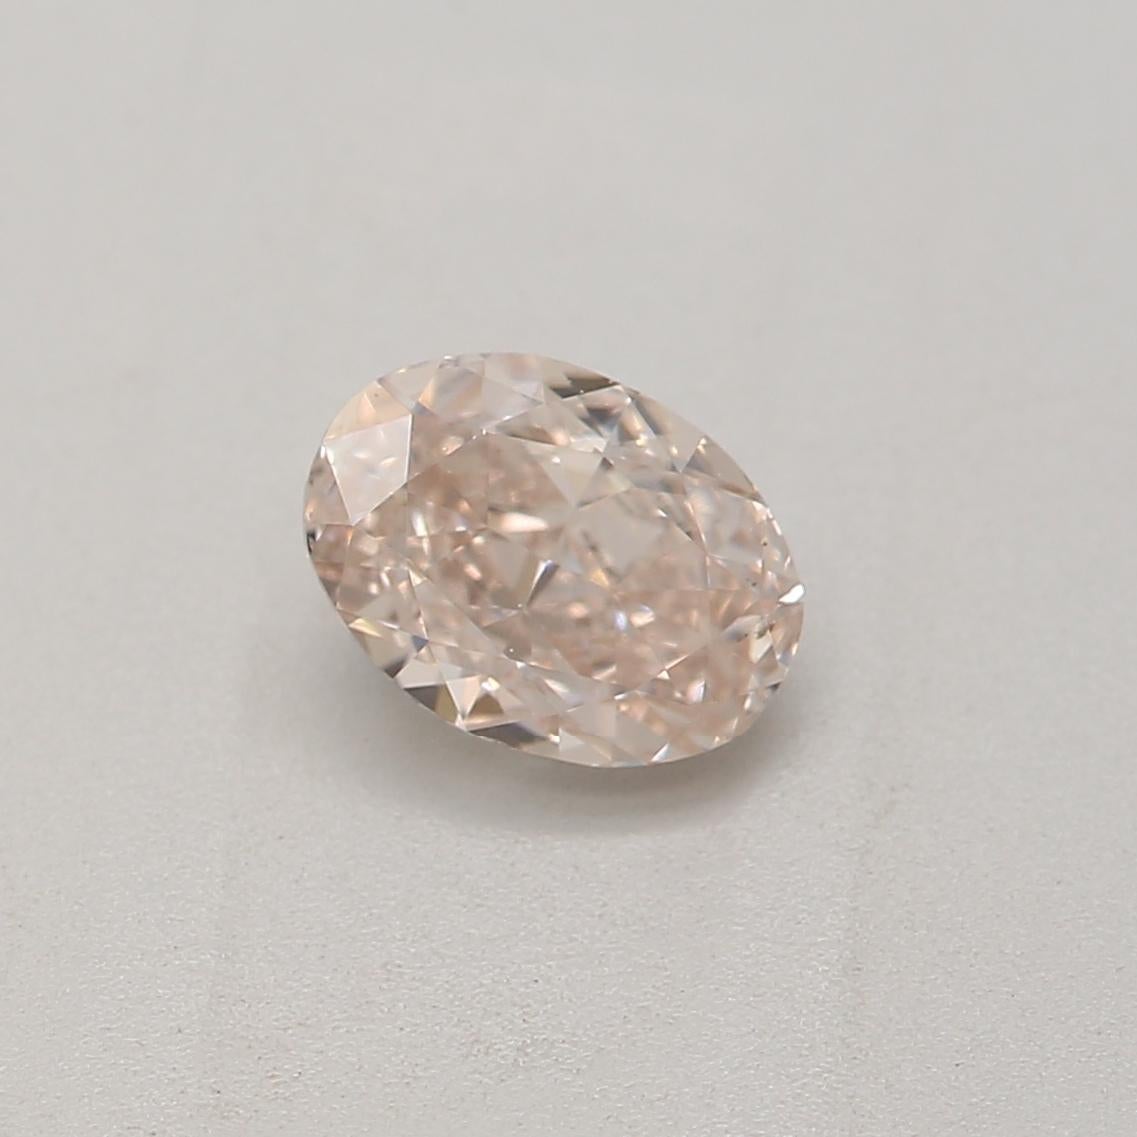 *100% NATURAL FANCY COLOUR DIAMOND*

✪ Diamond Details ✪

➛ Shape: Oval
➛ Colour Grade: Light Pink Brown
➛ Carat: 0.42
➛ Clarity: Si2
➛ GIA  Certified 

^FEATURES OF THE DIAMOND^

✪ Our Specialty ✪

➛ We can definitely work on your special custom